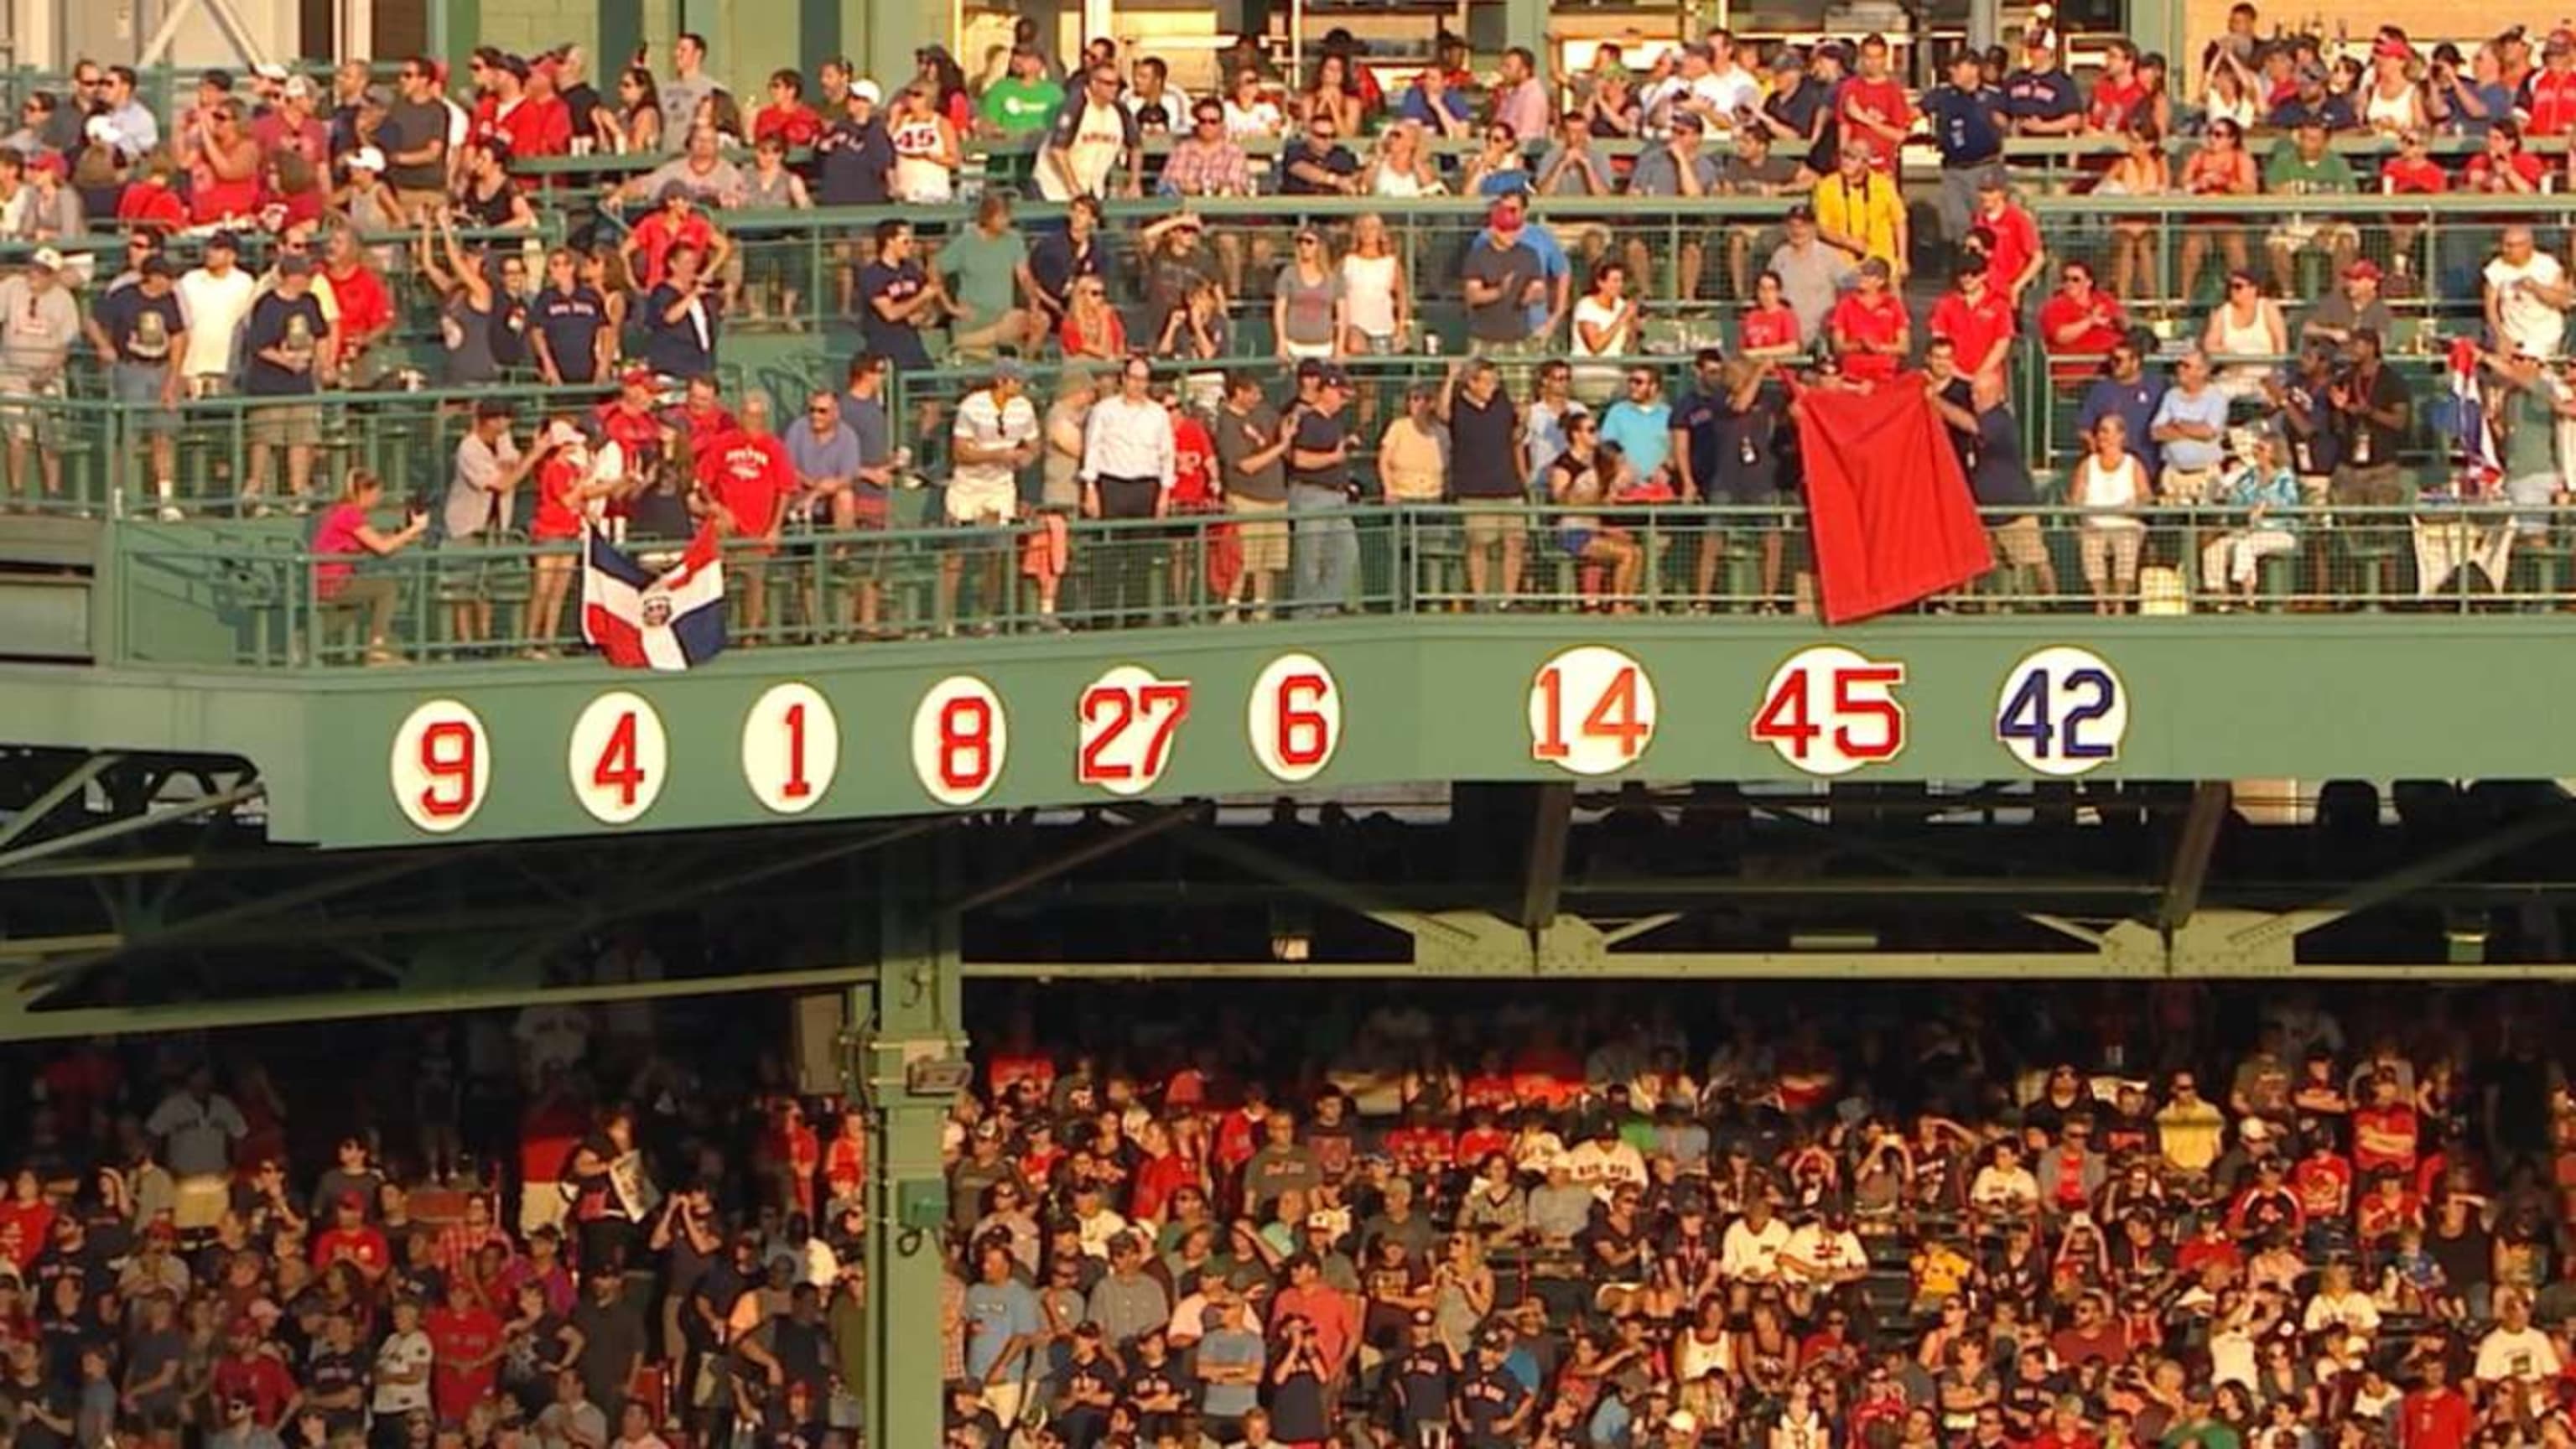 Pedro Martinez reigns in his parade as No. 45 is retired